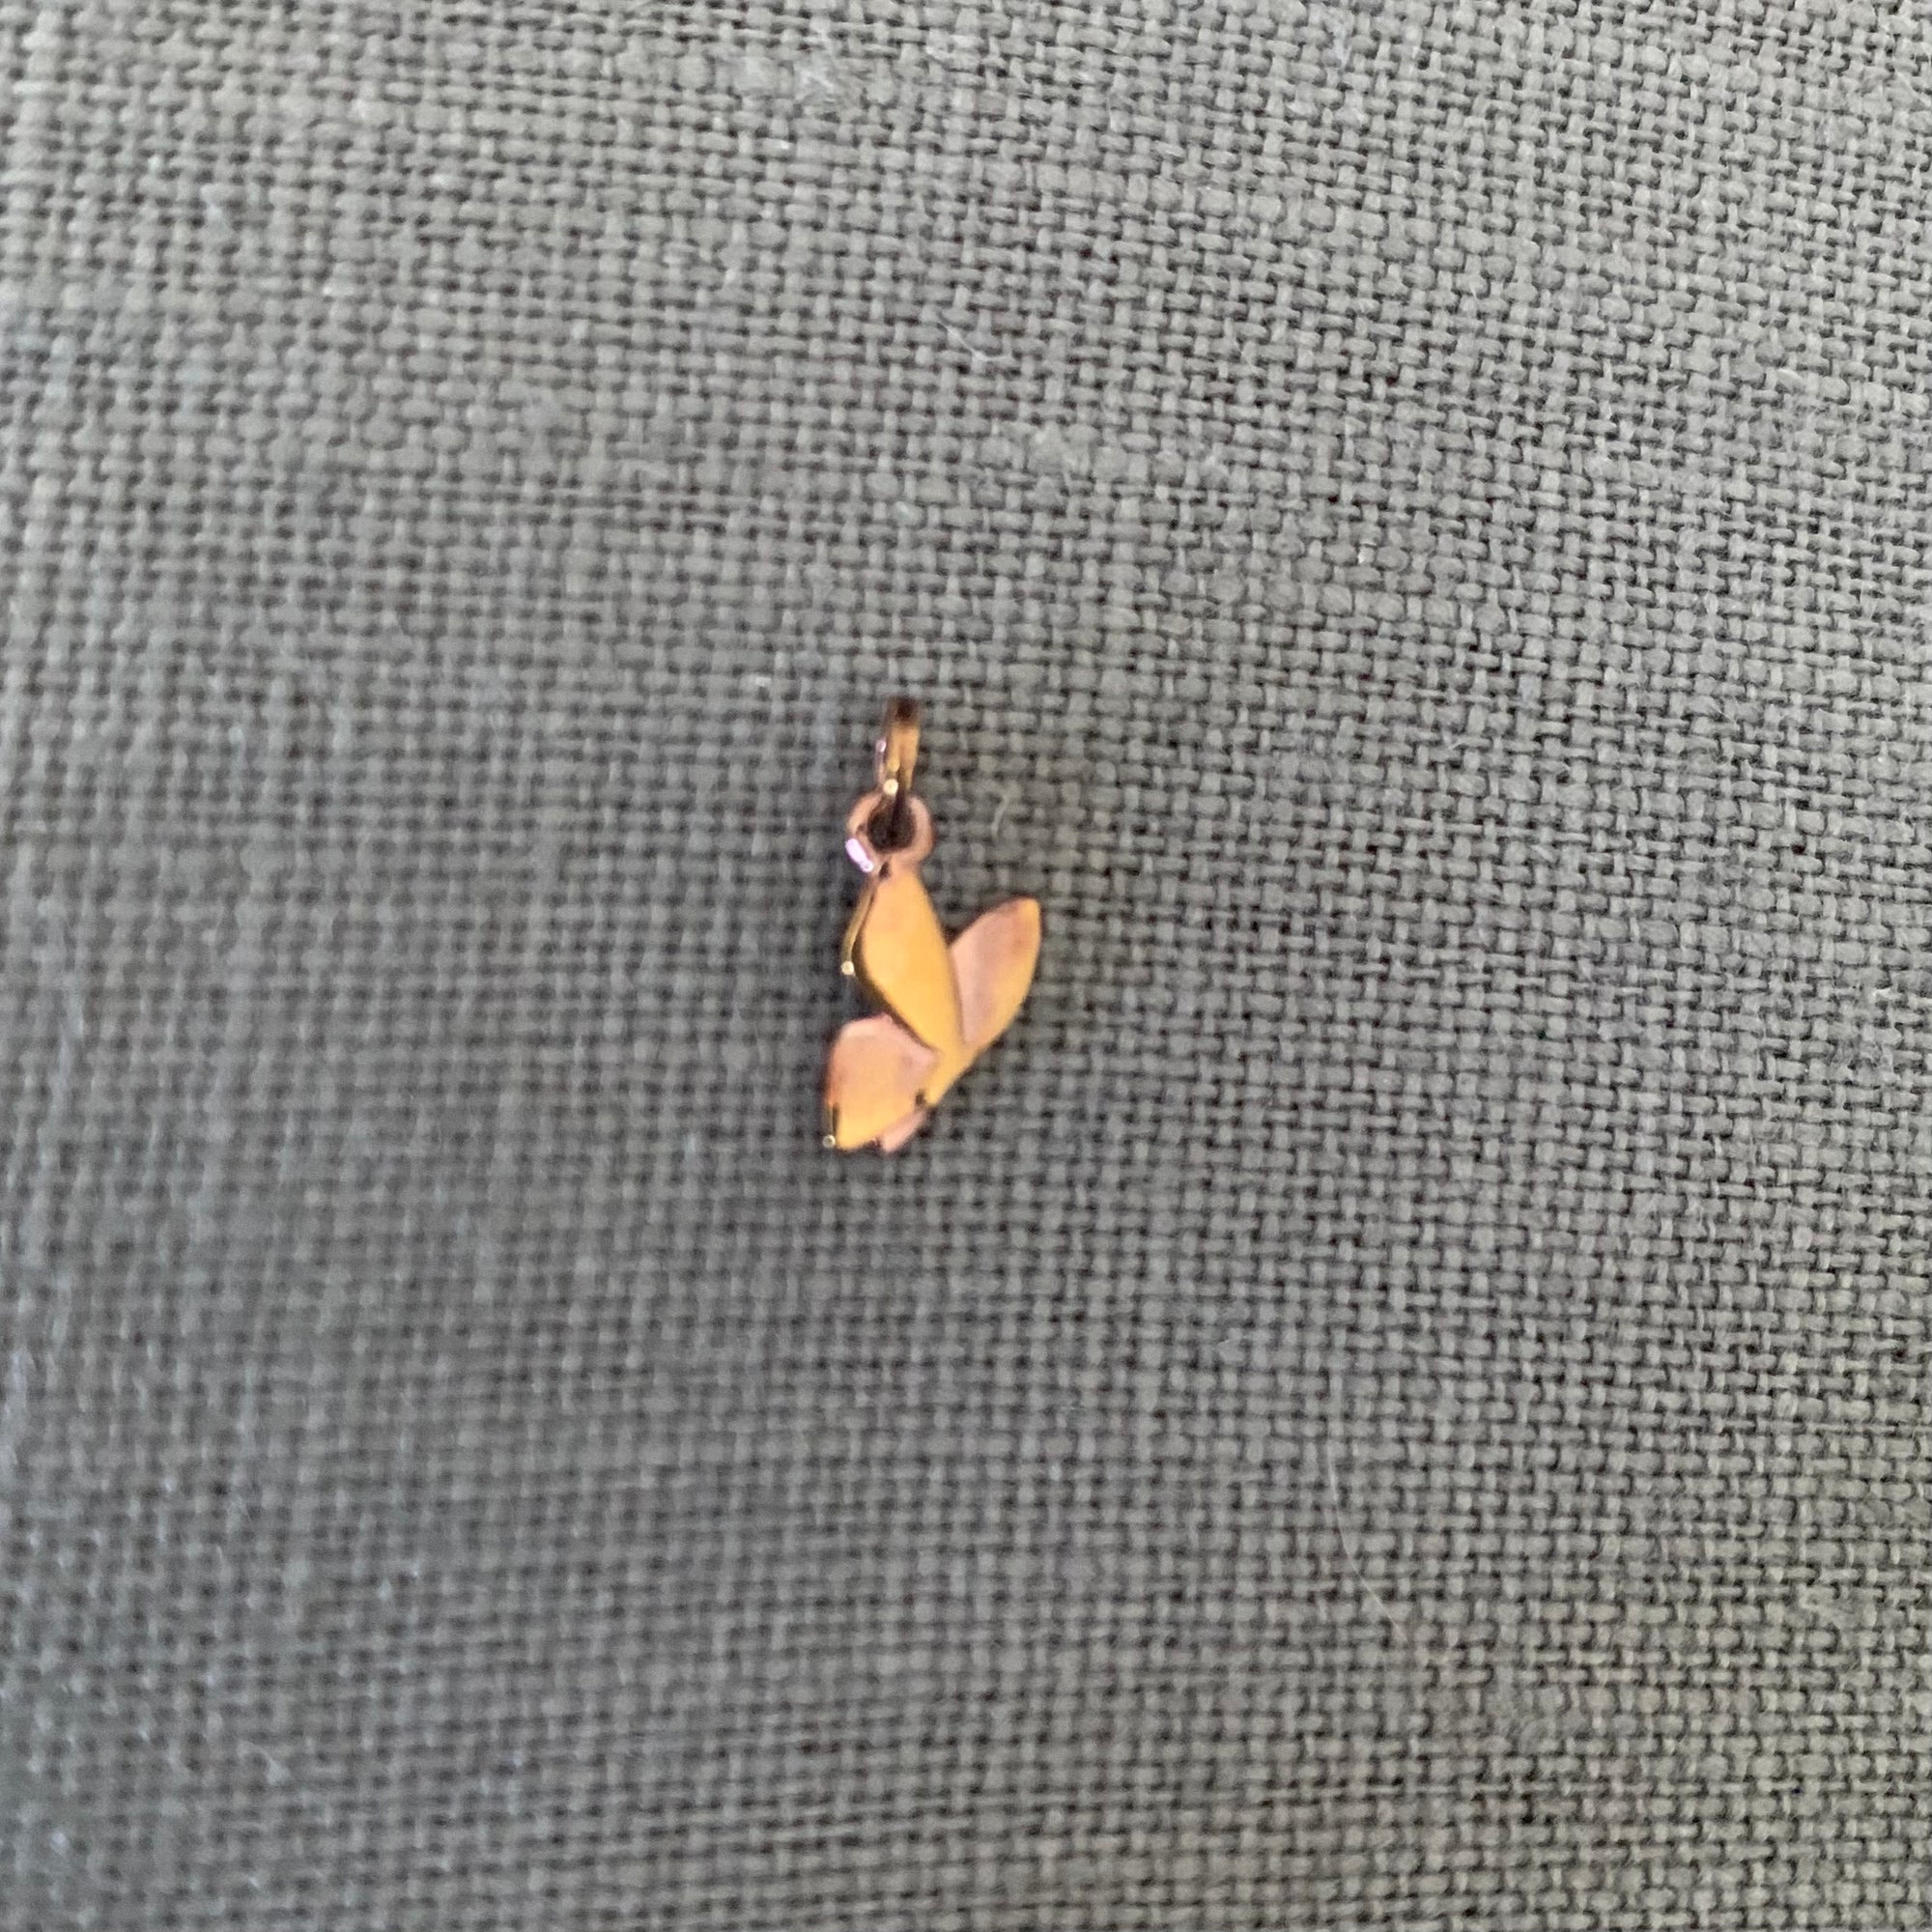 Polished Rose Gold Vermeil Butterfly Charm - Tiny